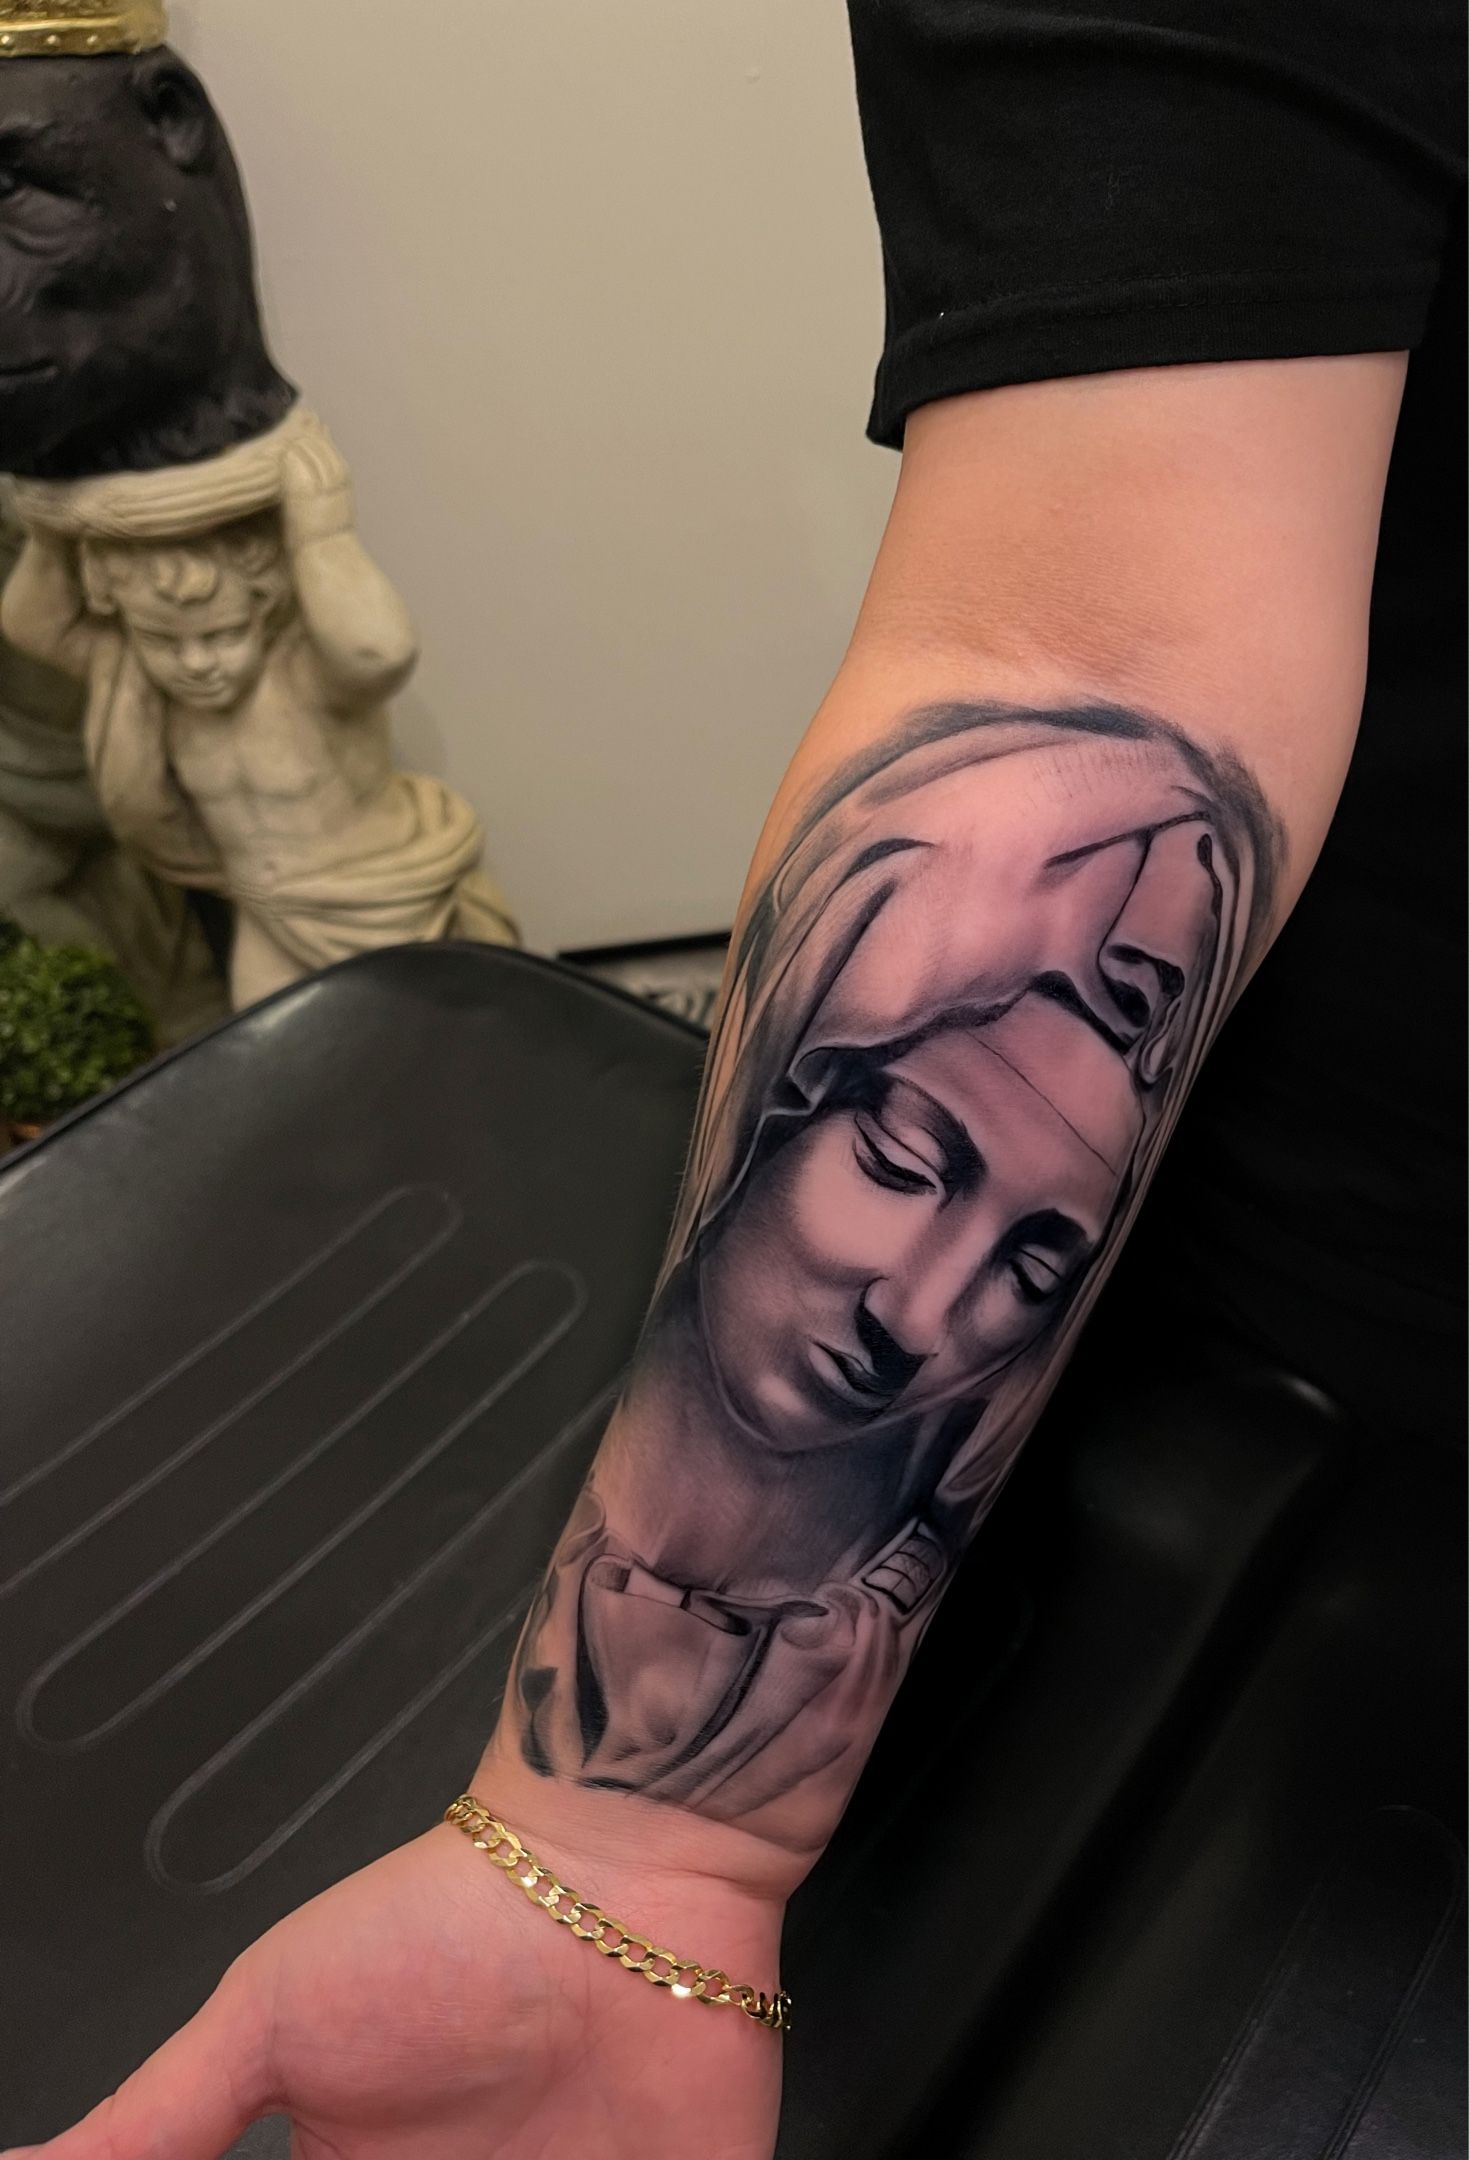 Virgin Mary tattoo by Dzikson Wildstyle  Post 9991